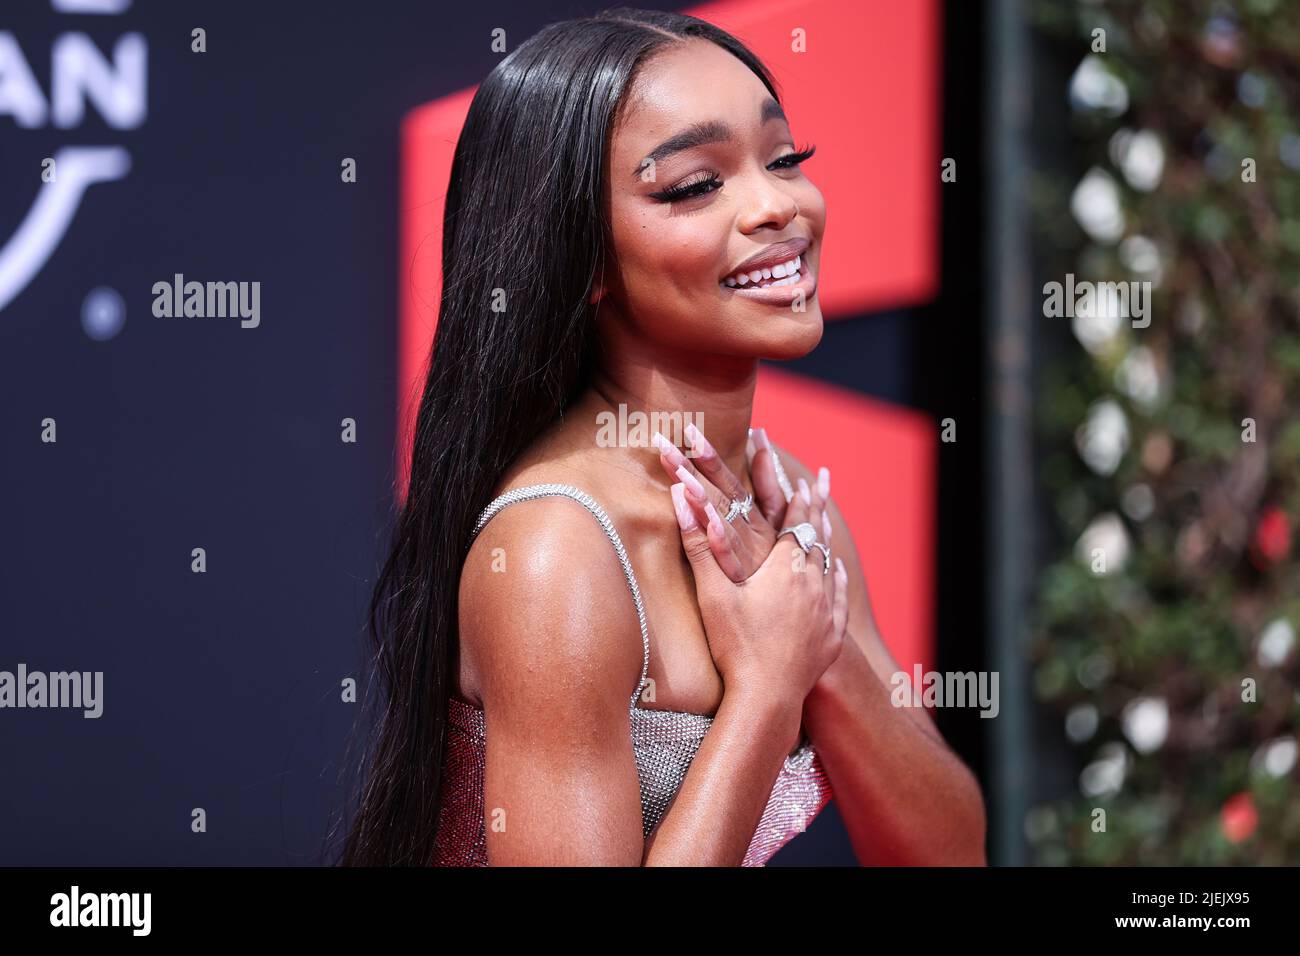 LOS ANGELES, CALIFORNIA, USA - JUNE 26: American actress Marsai Martin wearing a Dolce and Gabbana dress arrives at the BET Awards 2022 held at Microsoft Theater at L.A. Live on June 26, 2022 in Los Angeles, California, United States. (Photo by Xavier Collin/Image Press Agency) Credit: Image Press Agency/Alamy Live News Stock Photo